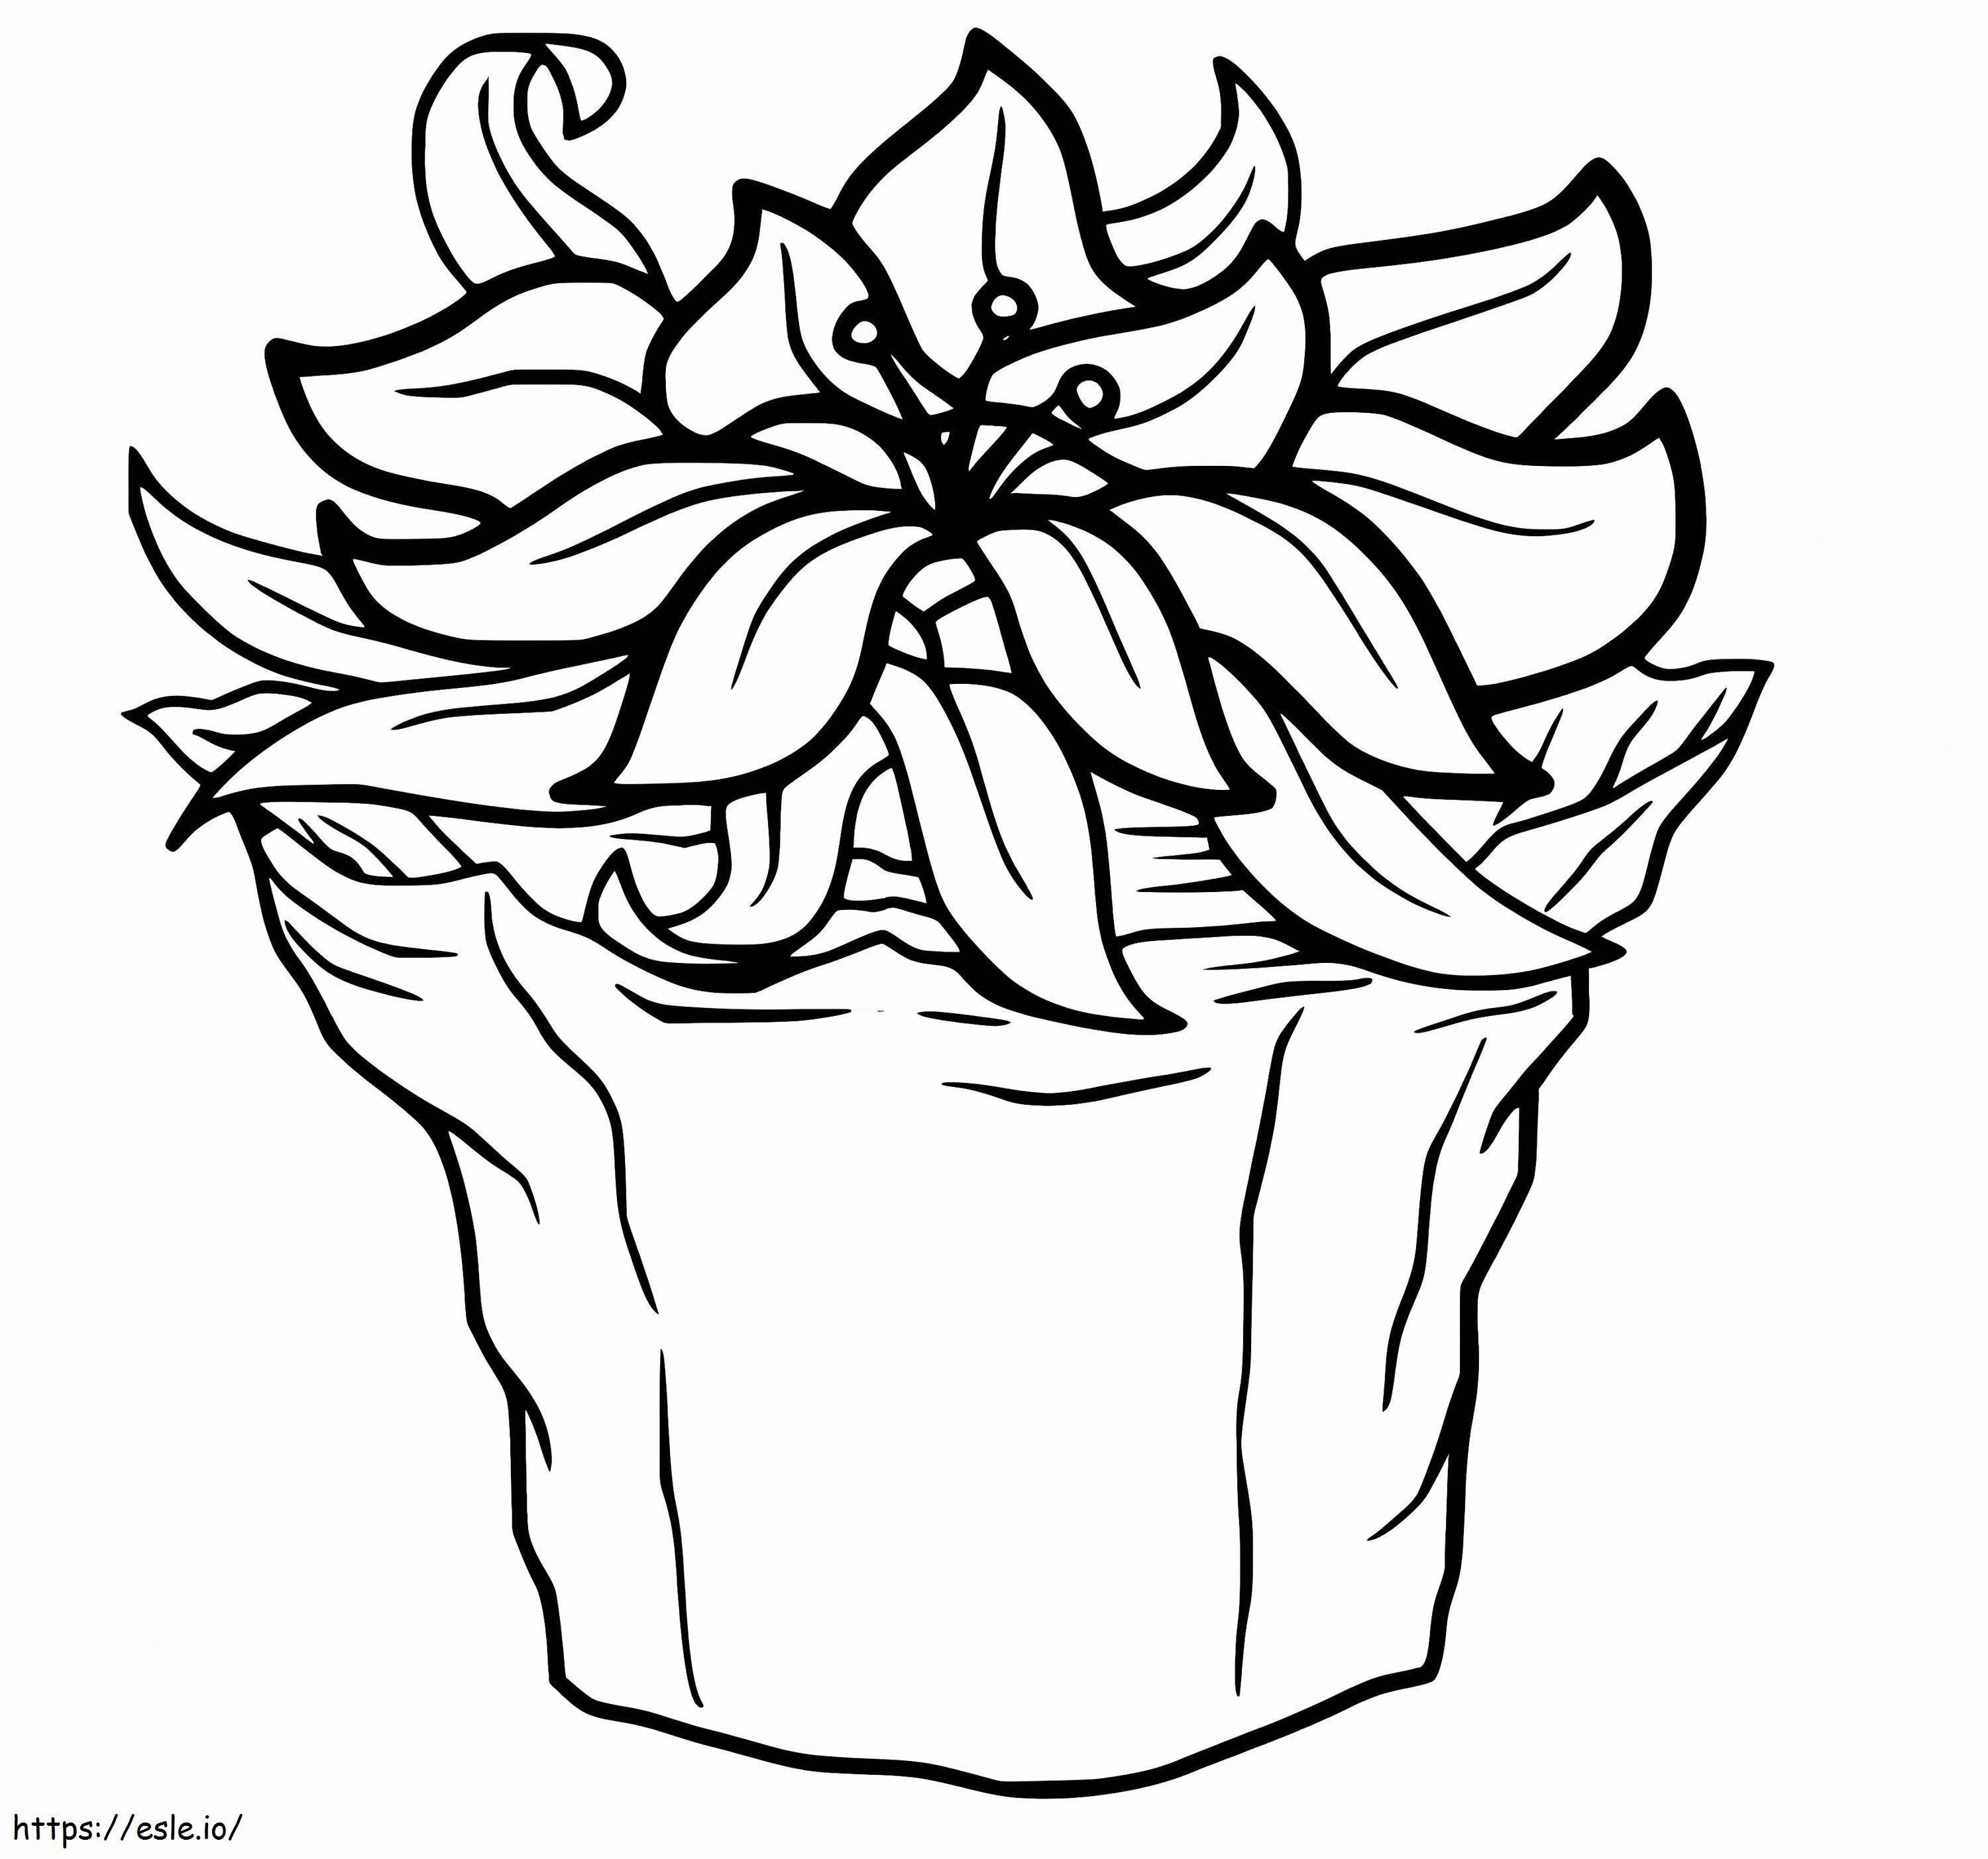 Poinsettia For Christmas coloring page